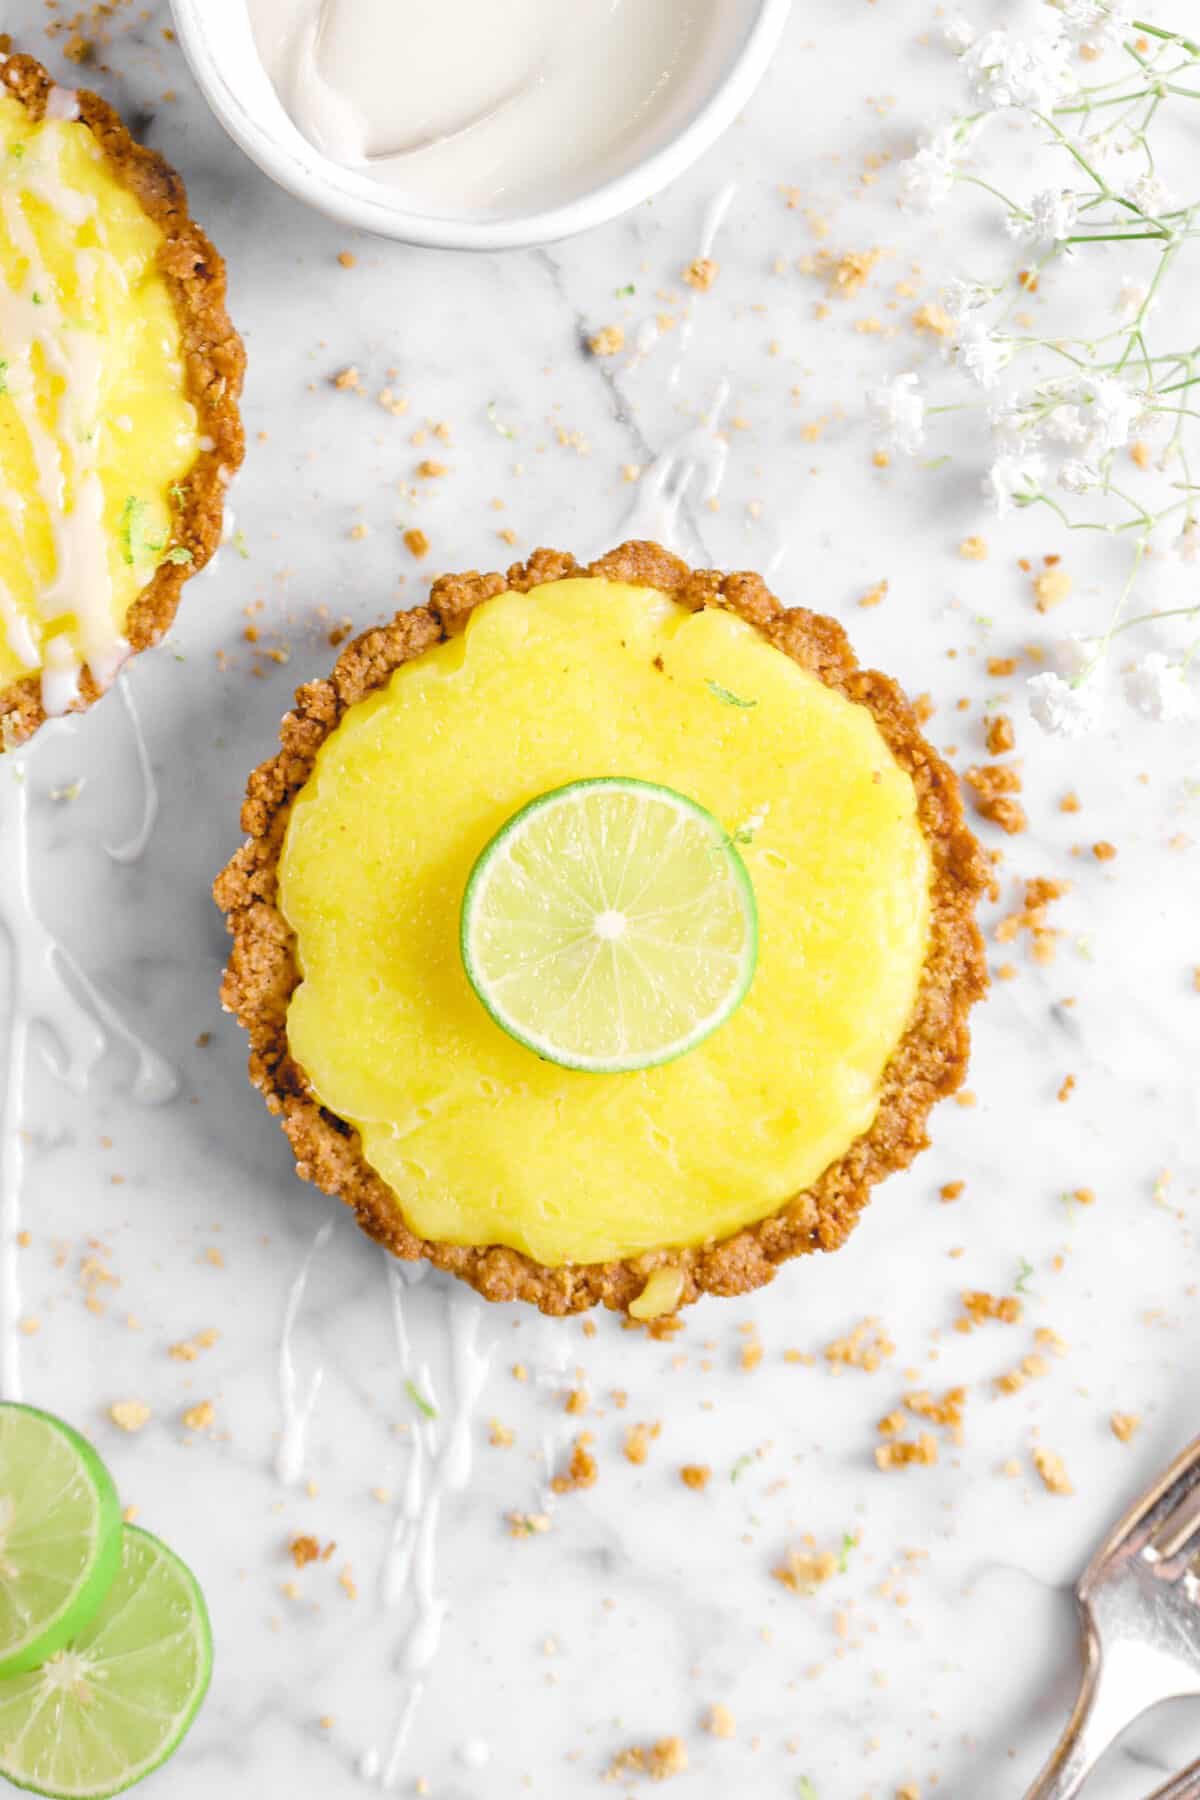 key lime pie with slice of key lime on top with flowers, crumbs, glaze, and fork